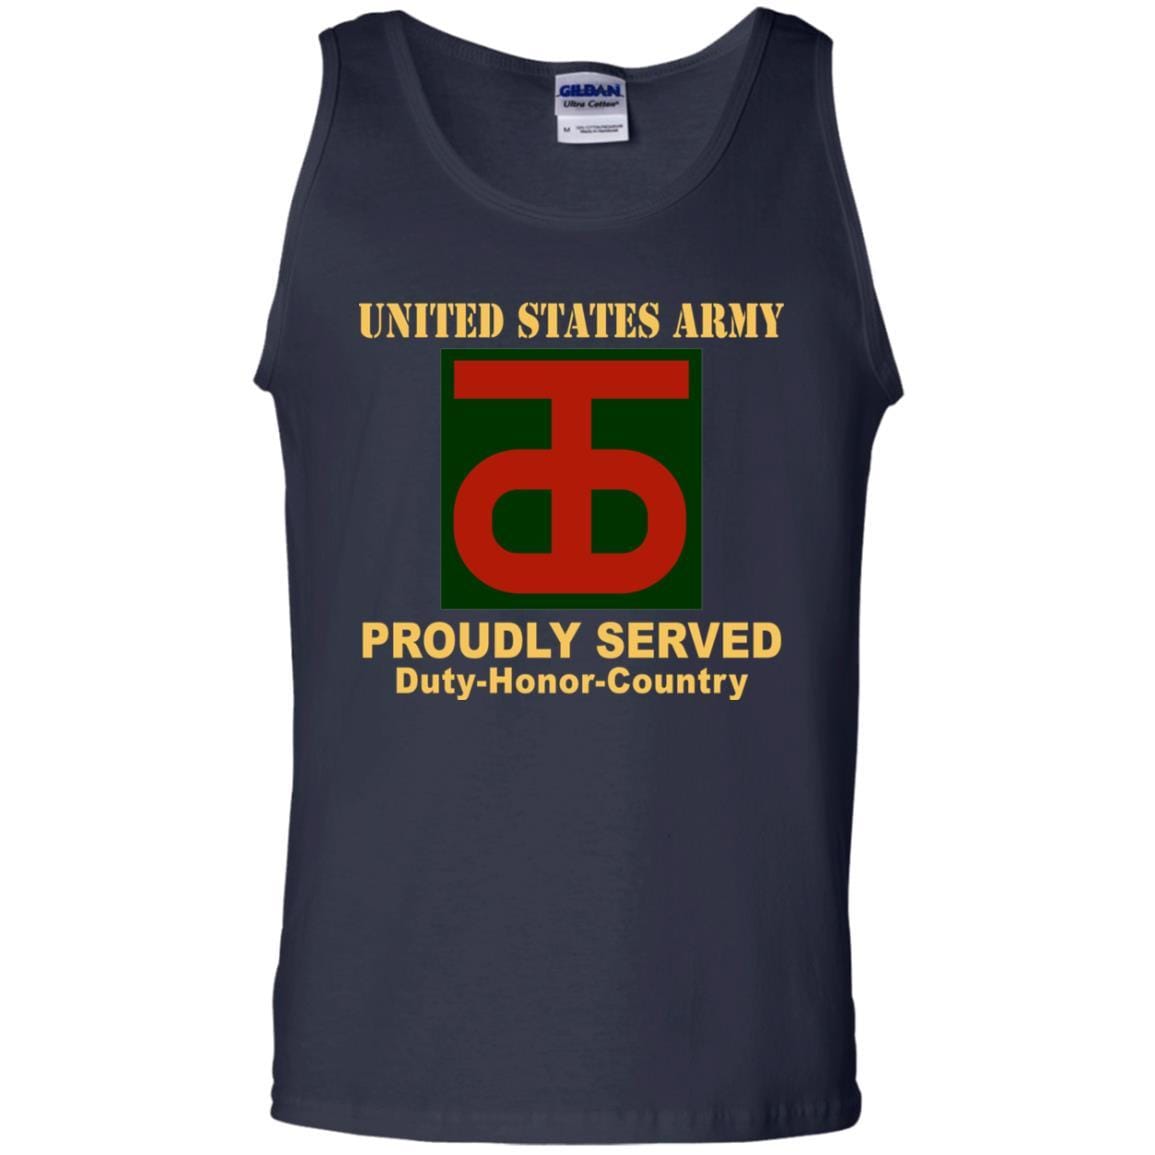 US ARMY 90 SUSTAINMENT BRIGADE - Proudly Served T-Shirt On Front For Men-TShirt-Army-Veterans Nation